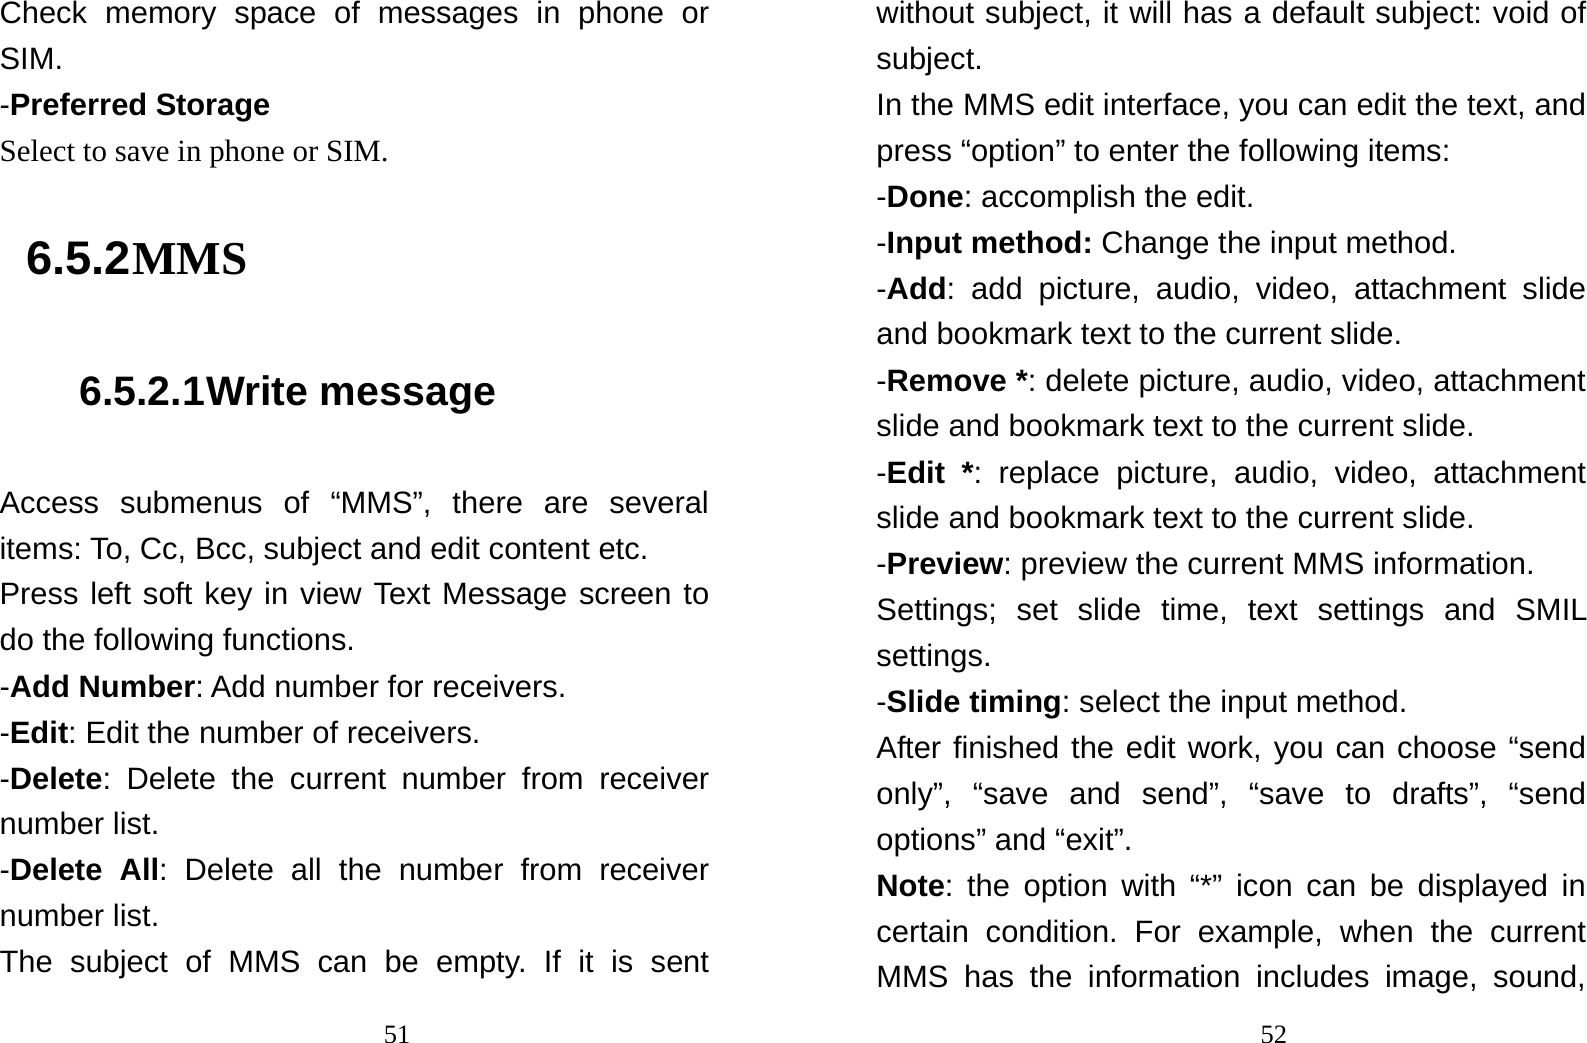                                51Check memory space of messages in phone or SIM. -Preferred Storage Select to save in phone or SIM. 6.5.2 MMS 6.5.2.1 Write message Access submenus of “MMS”, there are several items: To, Cc, Bcc, subject and edit content etc. Press left soft key in view Text Message screen to do the following functions. -Add Number: Add number for receivers. -Edit: Edit the number of receivers. -Delete: Delete the current number from receiver number list. -Delete All: Delete all the number from receiver number list. The subject of MMS can be empty. If it is sent                                52without subject, it will has a default subject: void of subject. In the MMS edit interface, you can edit the text, and press “option” to enter the following items:   -Done: accomplish the edit. -Input method: Change the input method. -Add: add picture, audio, video, attachment slide and bookmark text to the current slide. -Remove *: delete picture, audio, video, attachment slide and bookmark text to the current slide. -Edit *: replace picture, audio, video, attachment slide and bookmark text to the current slide. -Preview: preview the current MMS information. Settings; set slide time, text settings and SMIL settings. -Slide timing: select the input method. After finished the edit work, you can choose “send only”, “save and send”, “save to drafts”, “send options” and “exit”. Note: the option with “*” icon can be displayed in certain condition. For example, when the current MMS has the information includes image, sound, 